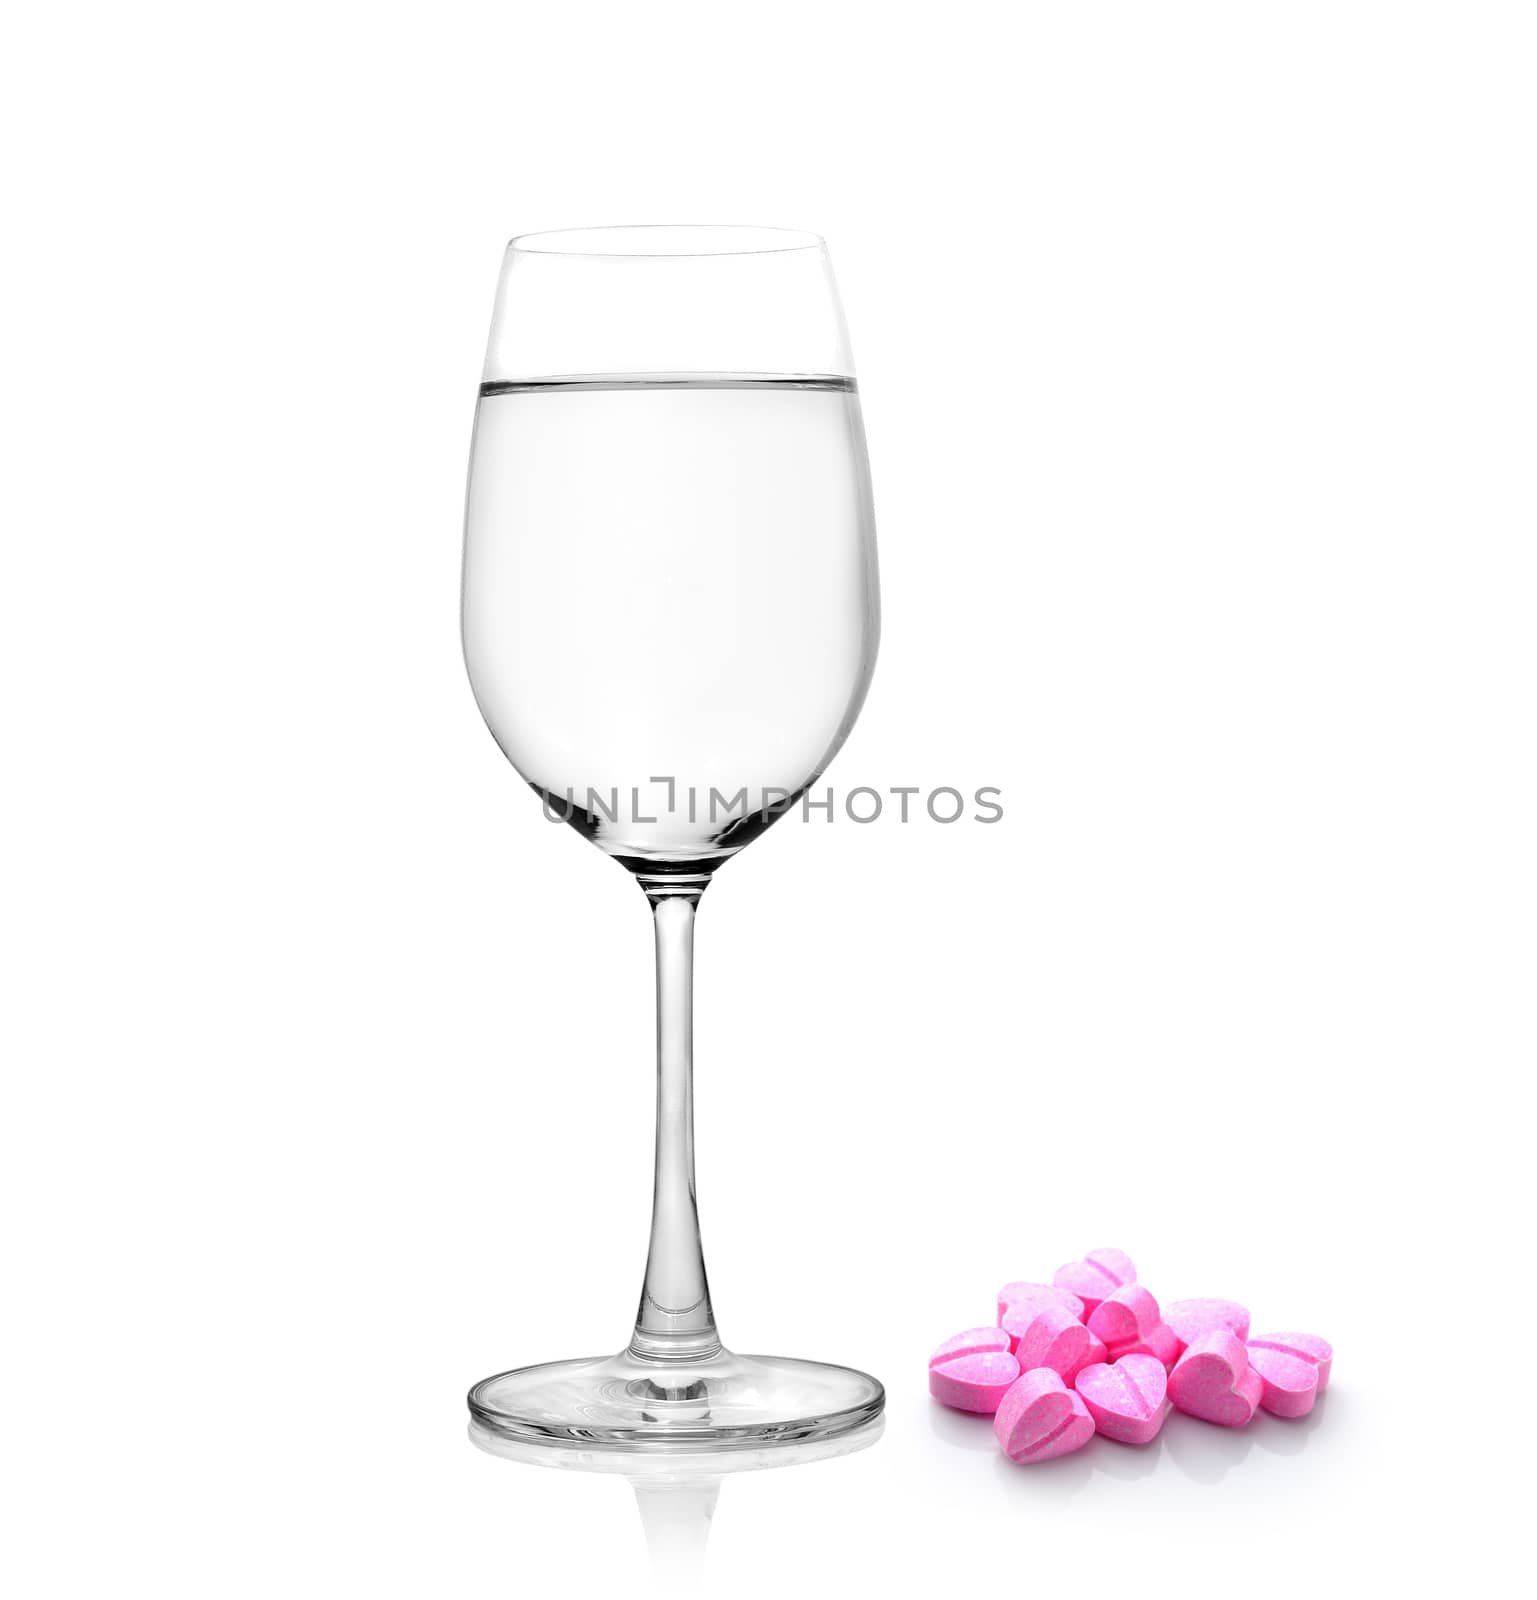 Glass of water and pills isolated on white background